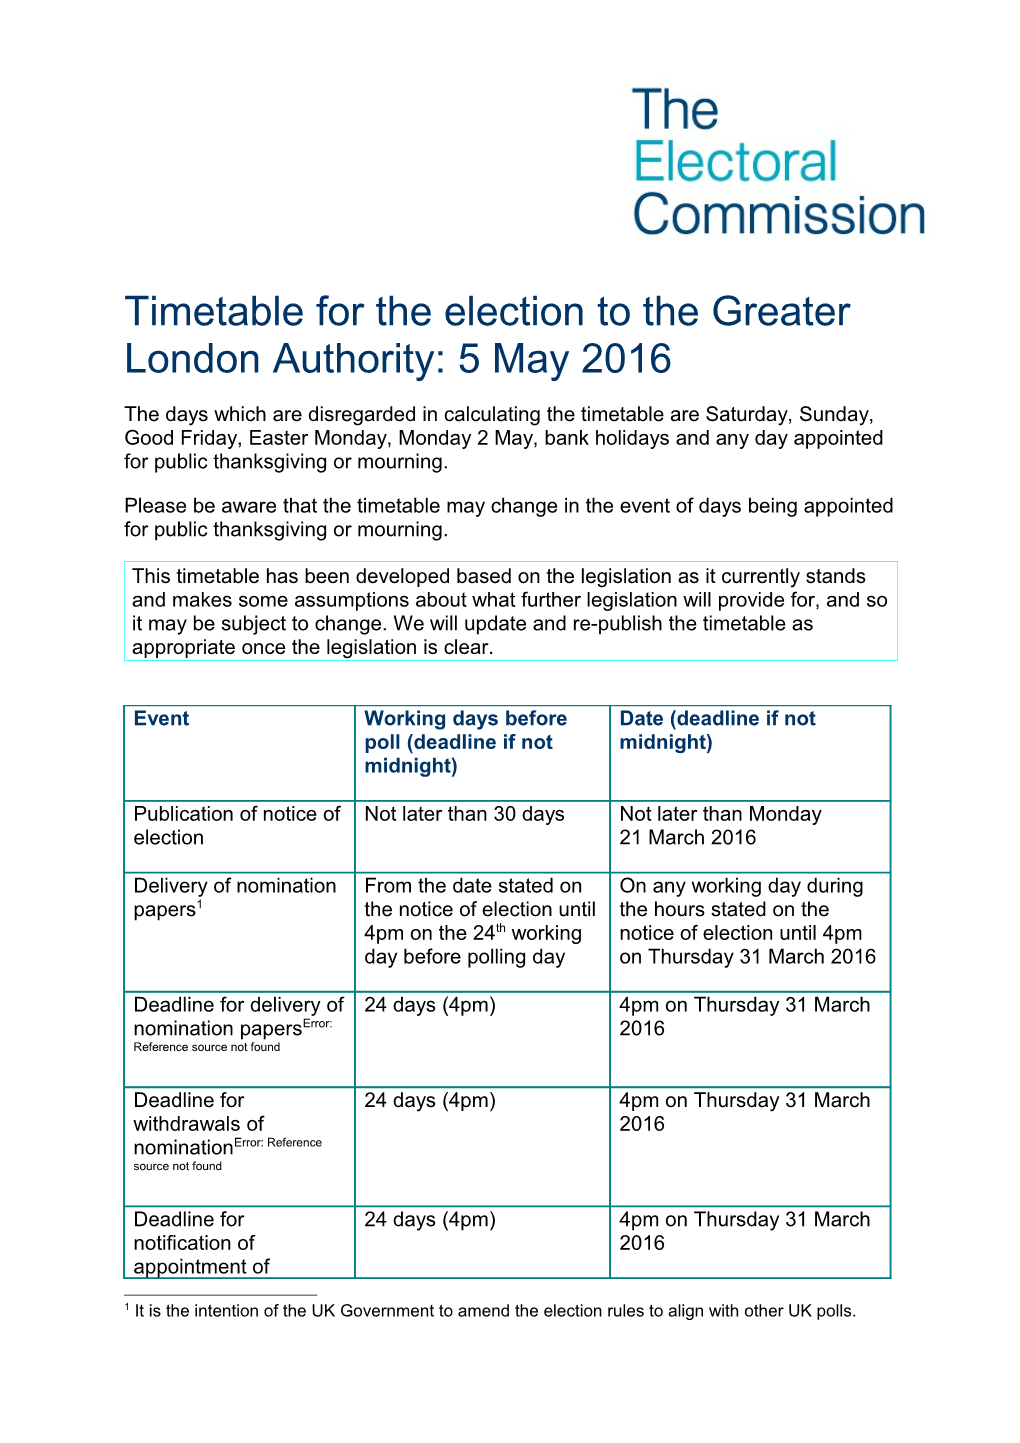 Timetable for the Election to the Greater London Authority: 5 May 2016